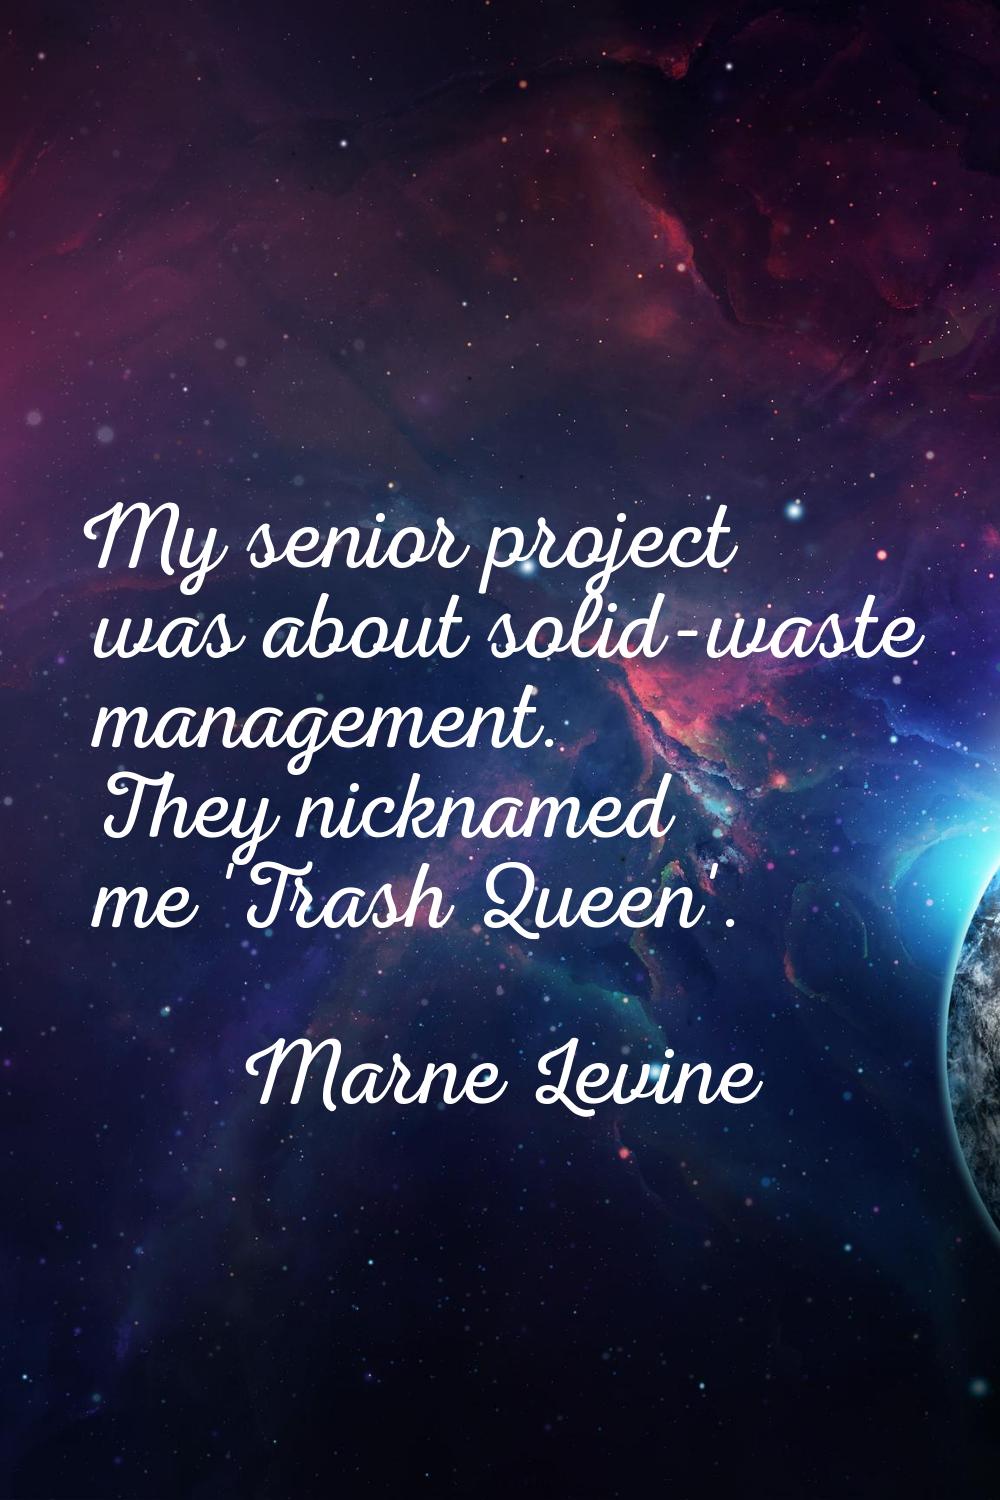 My senior project was about solid-waste management. They nicknamed me 'Trash Queen'.